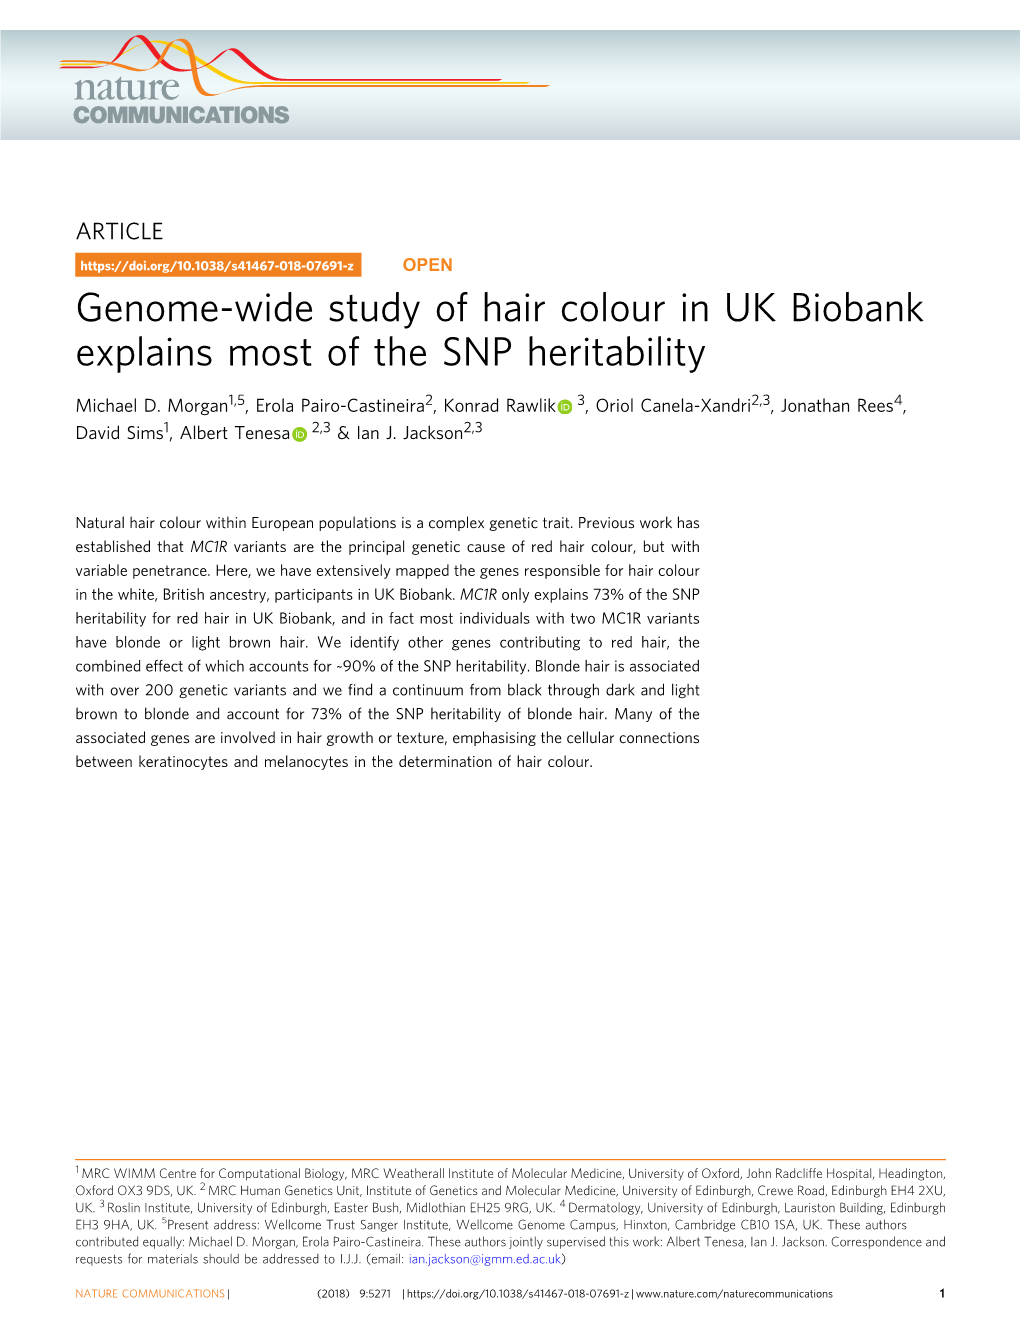 Genome-Wide Study of Hair Colour in UK Biobank Explains Most of the SNP Heritability